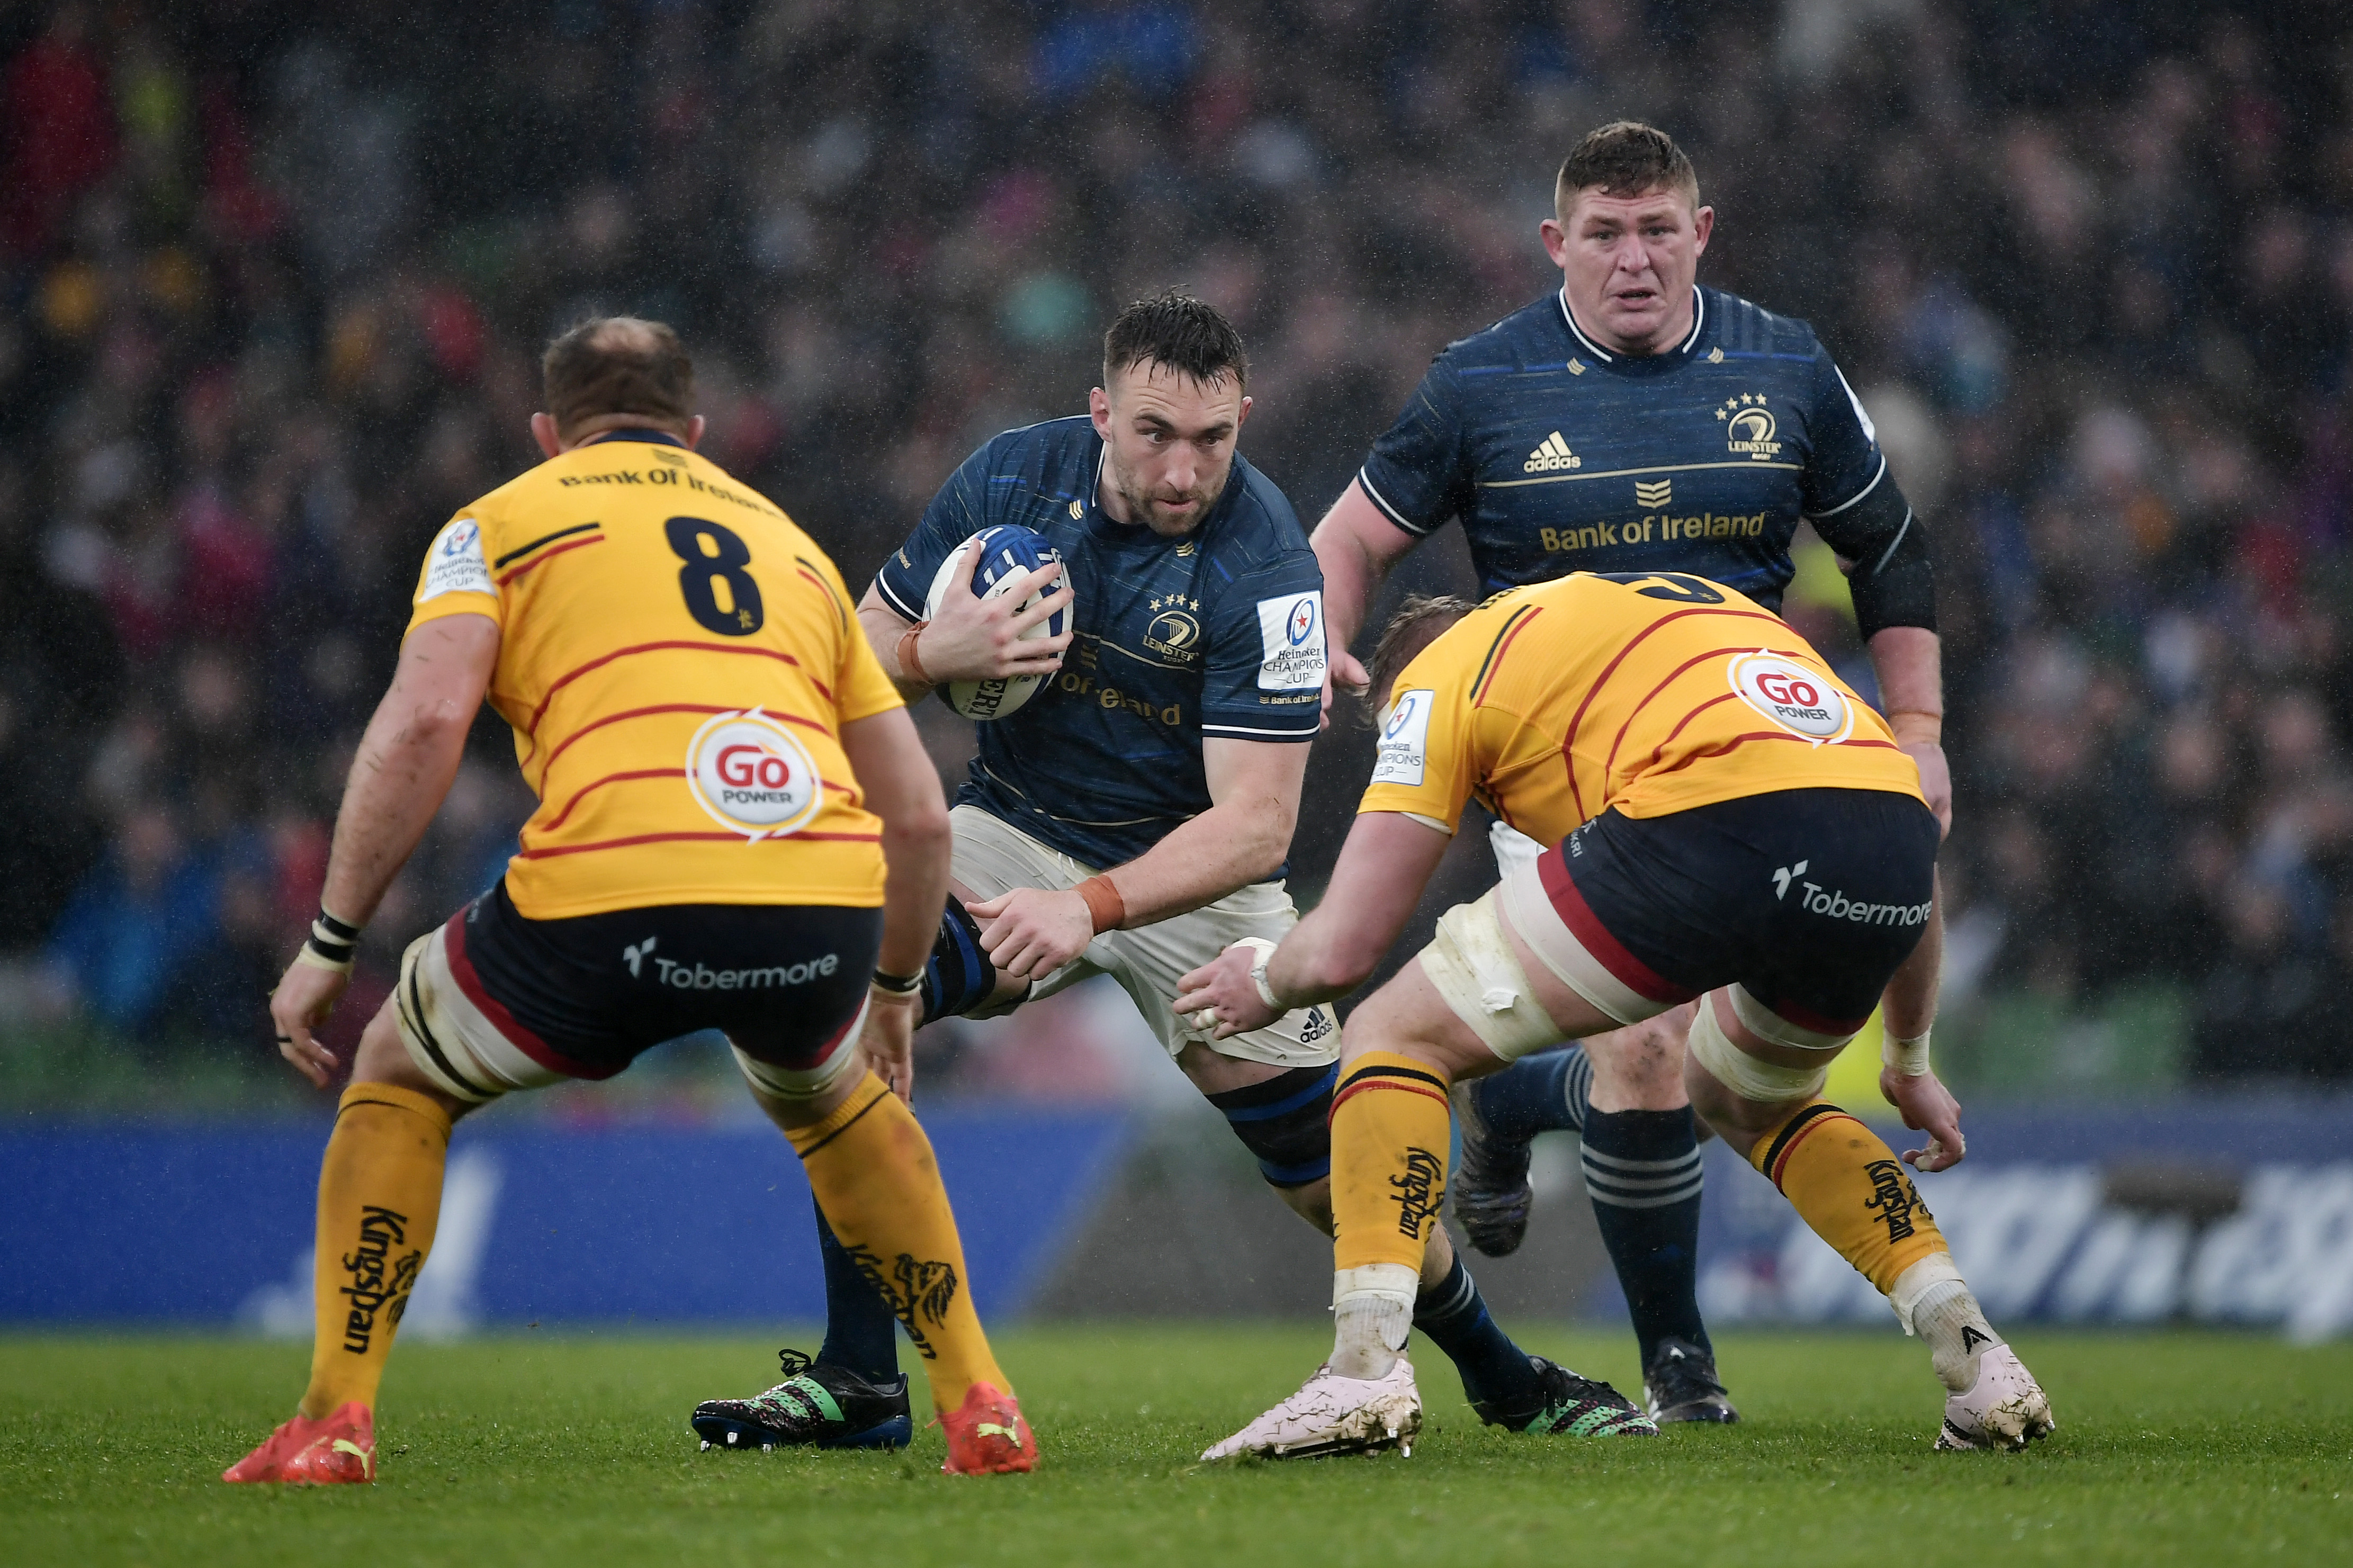 Leinster power on to Champions Cup quarter-finals after beating Ulster in rain-soaked derby